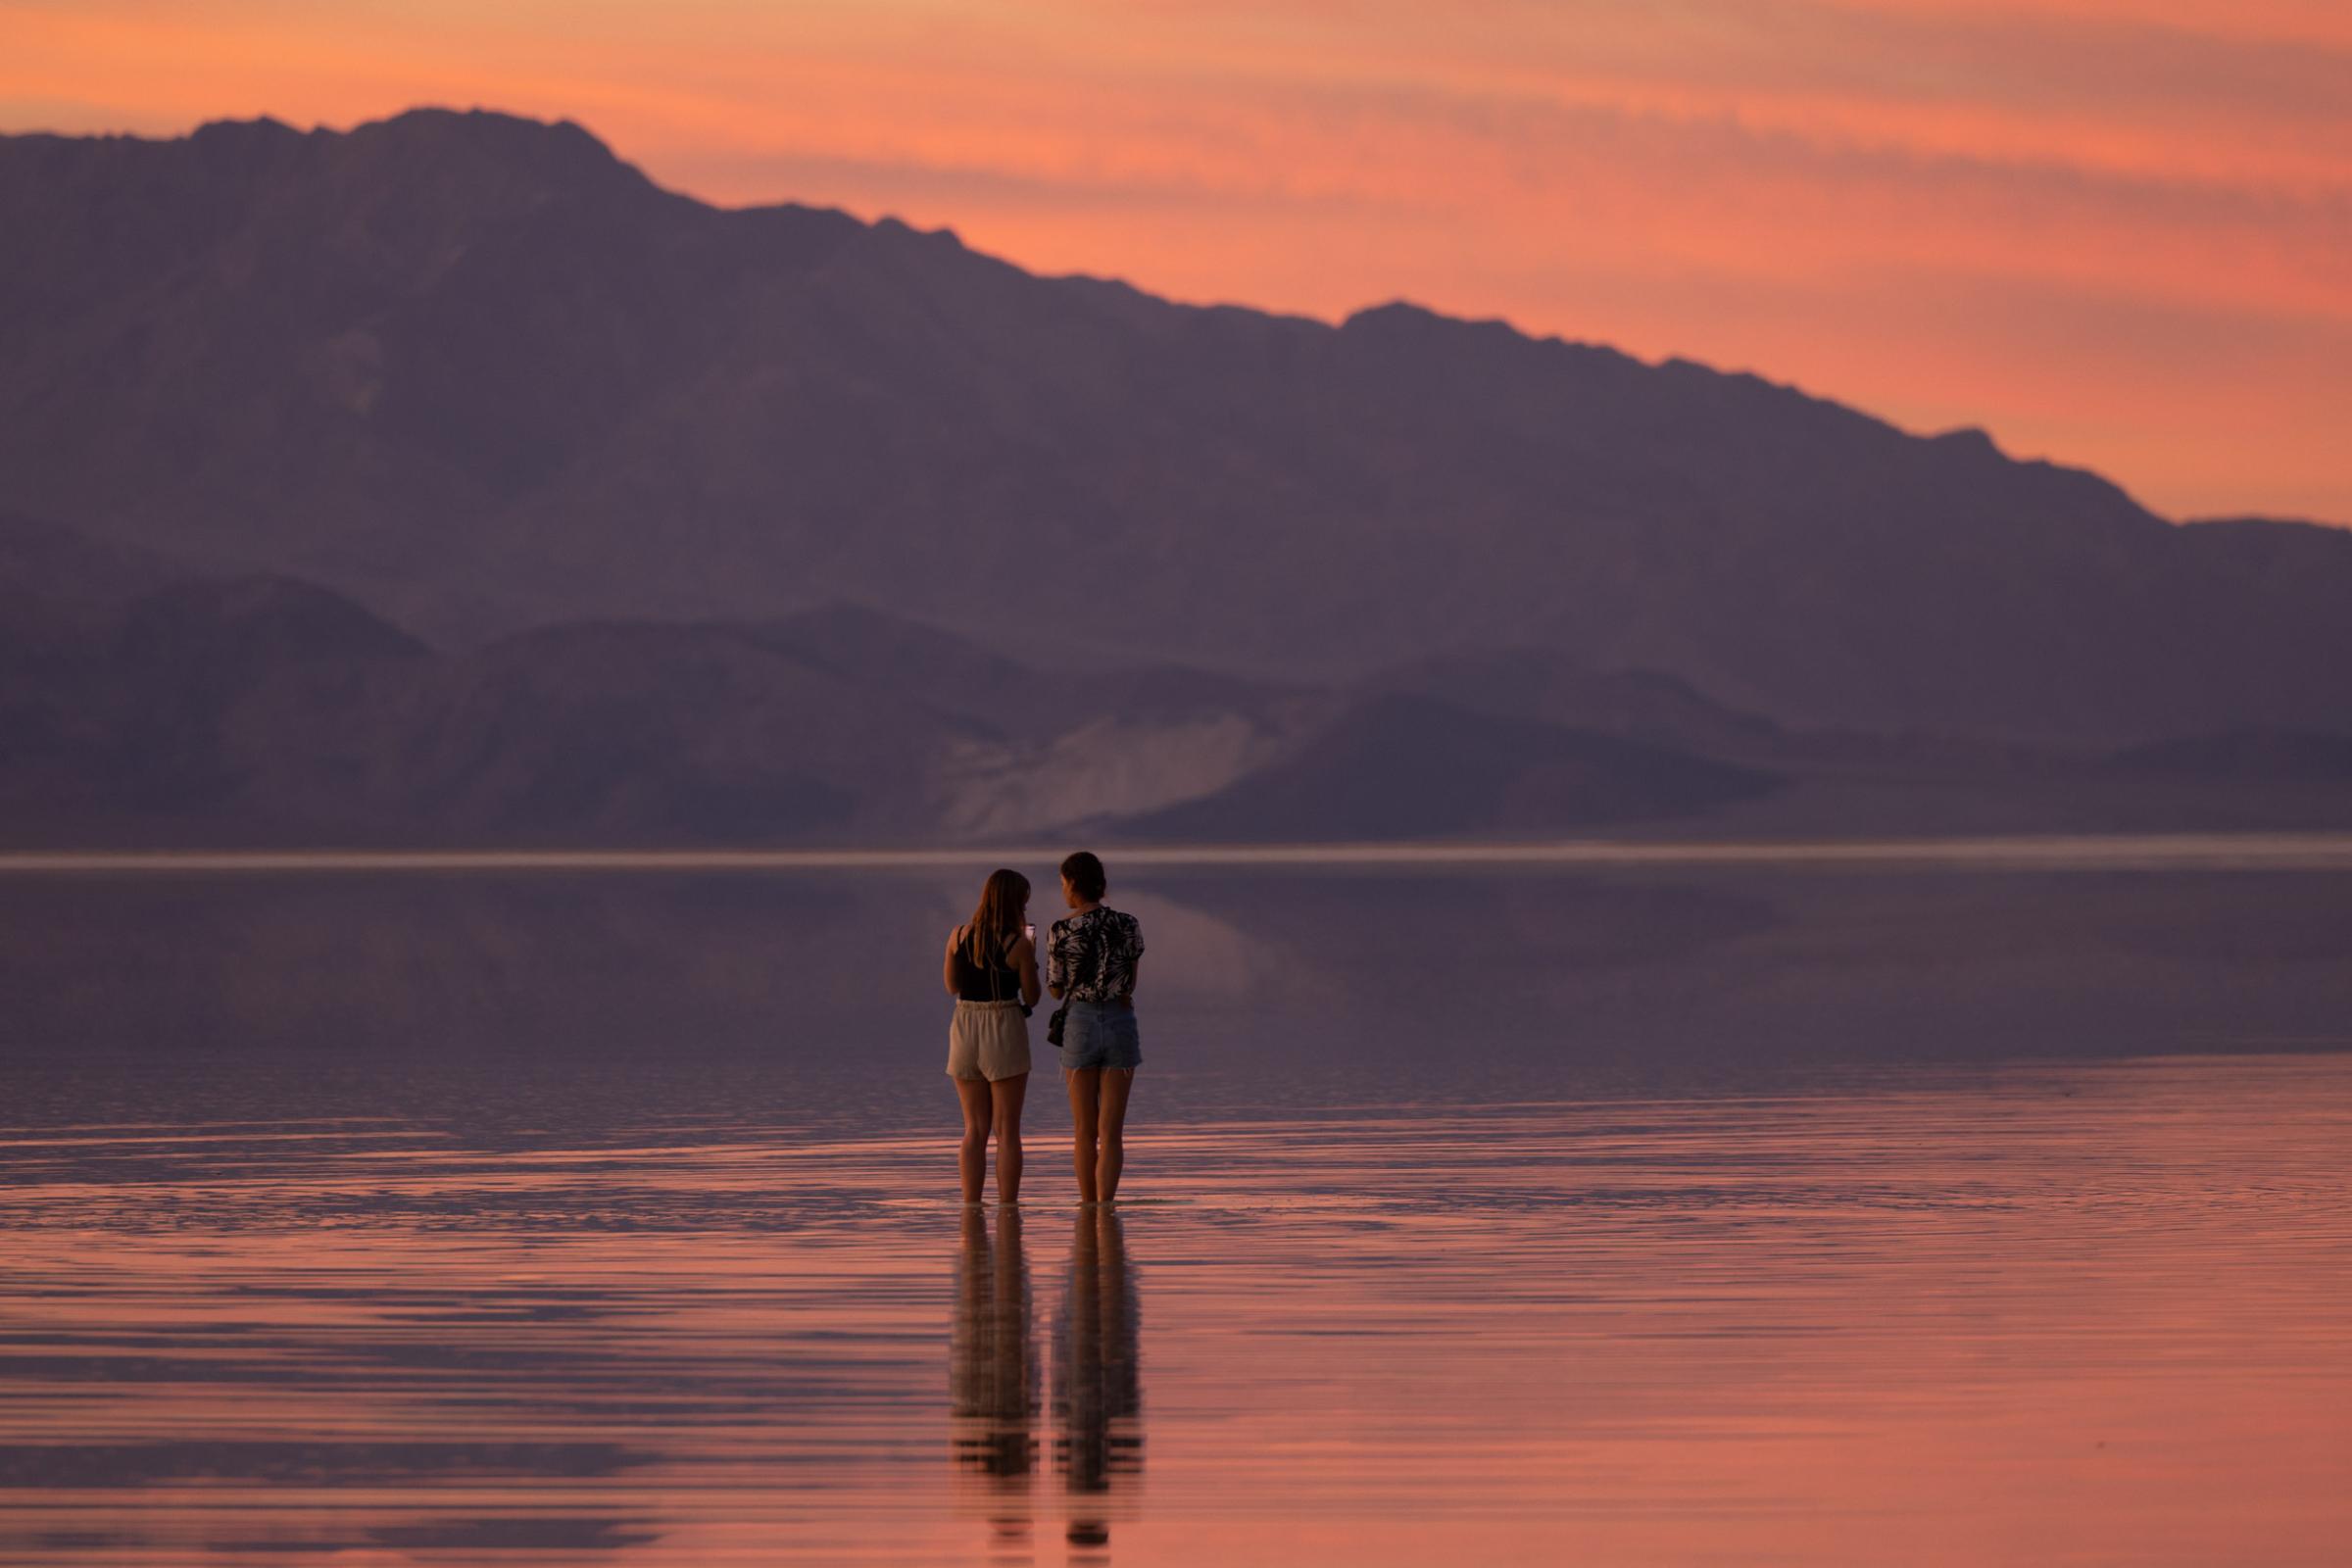 In Death Valley a Lake Come Alive  - In the distance gleamed the white salt flats of Badwater...